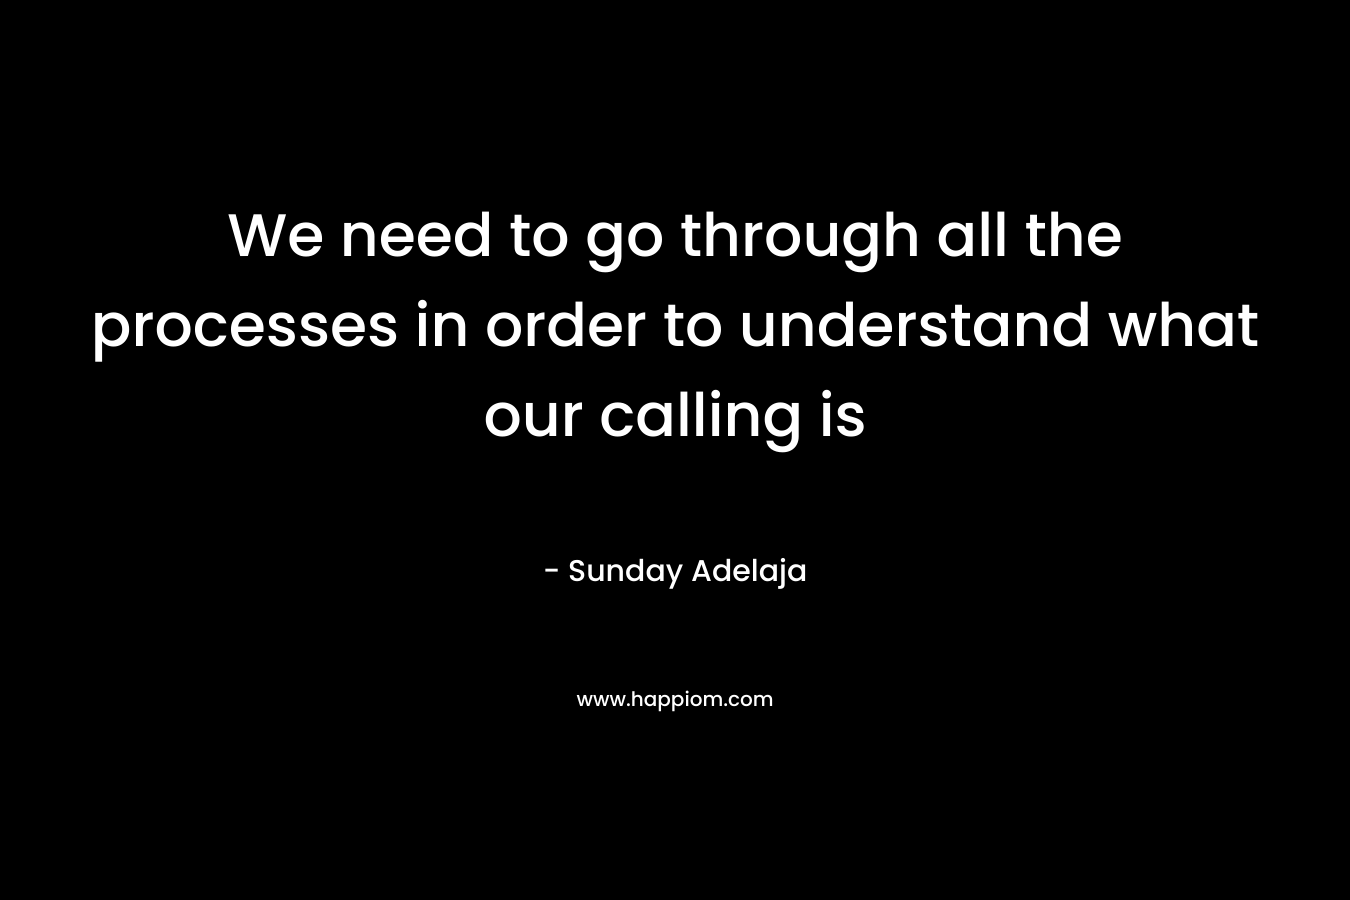 We need to go through all the processes in order to understand what our calling is